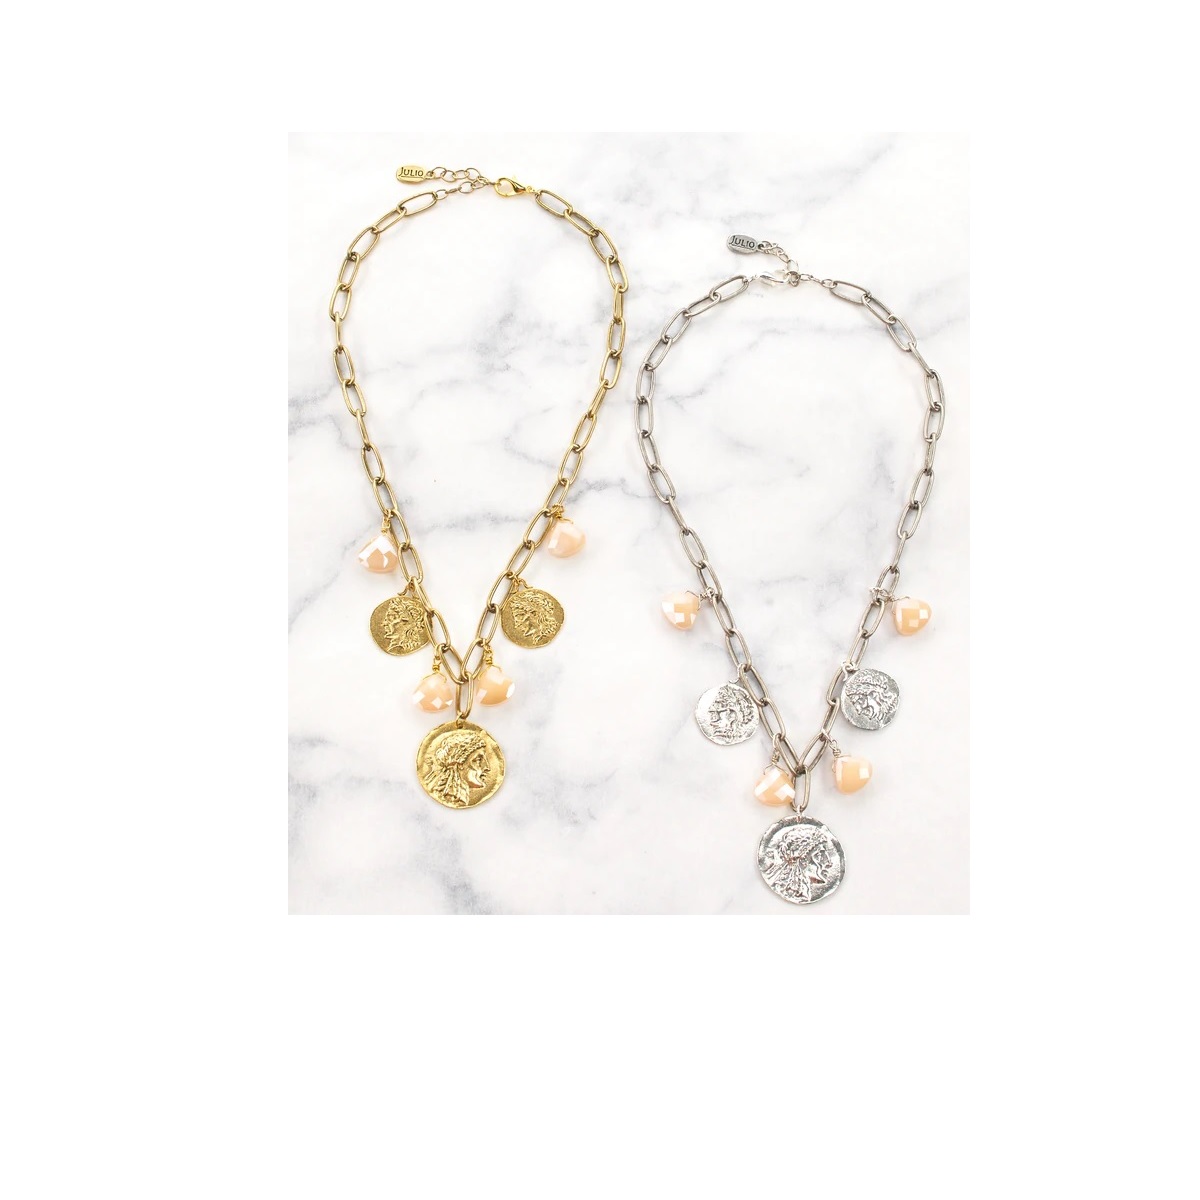 Roman coin trio on paperclip chain with crystal briolette accents. 